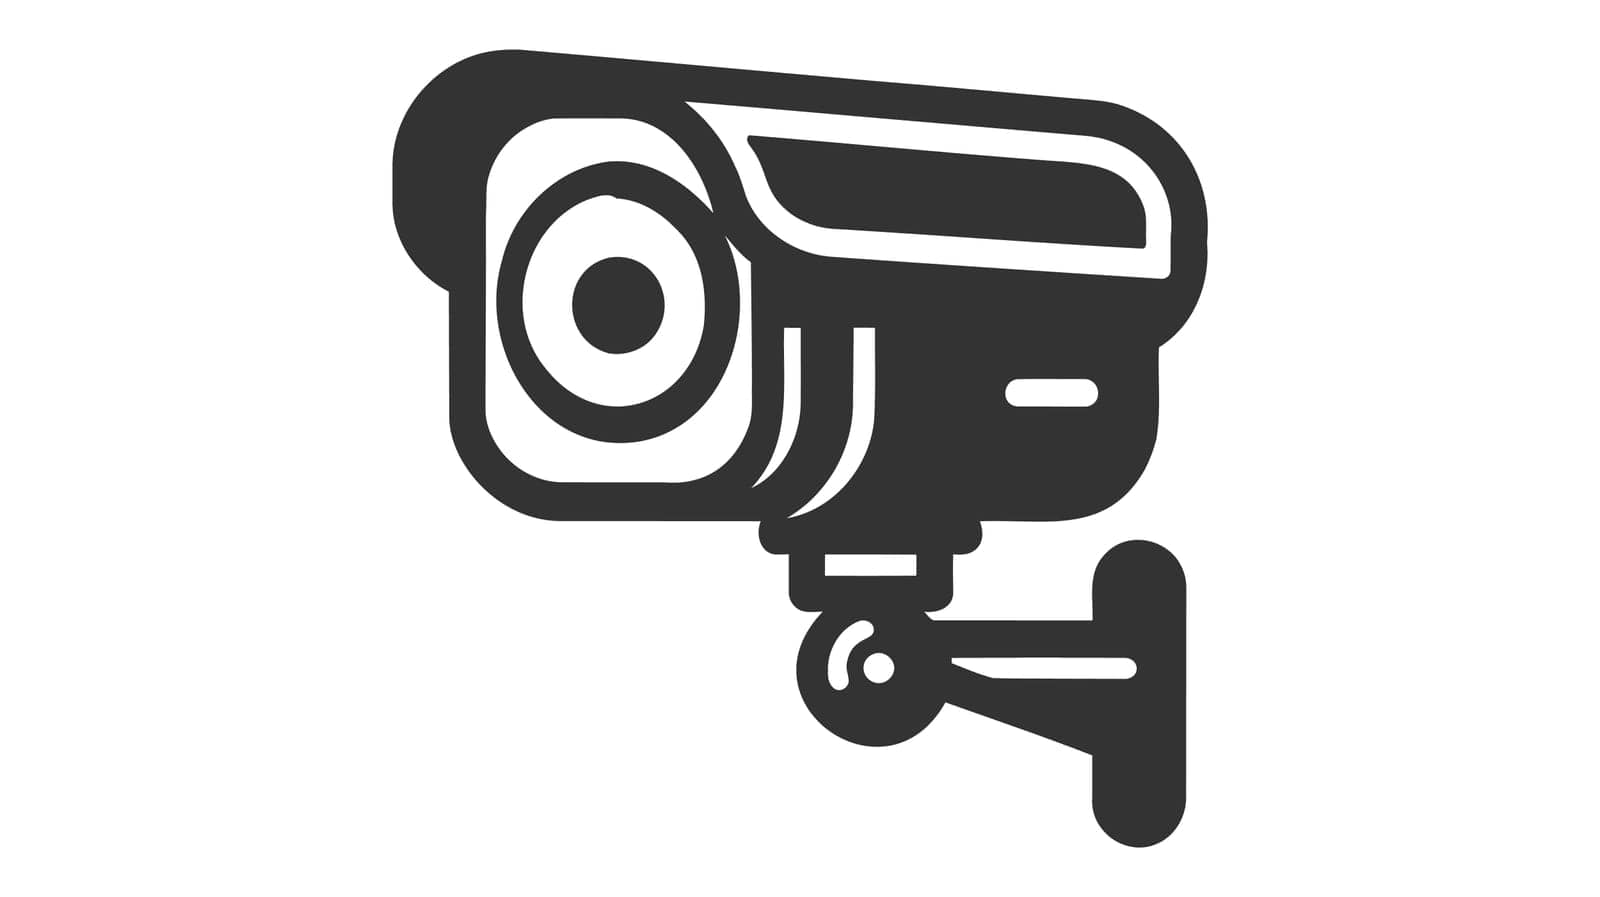 Illustration of black icon for an isolated CCTV camera with a white background.